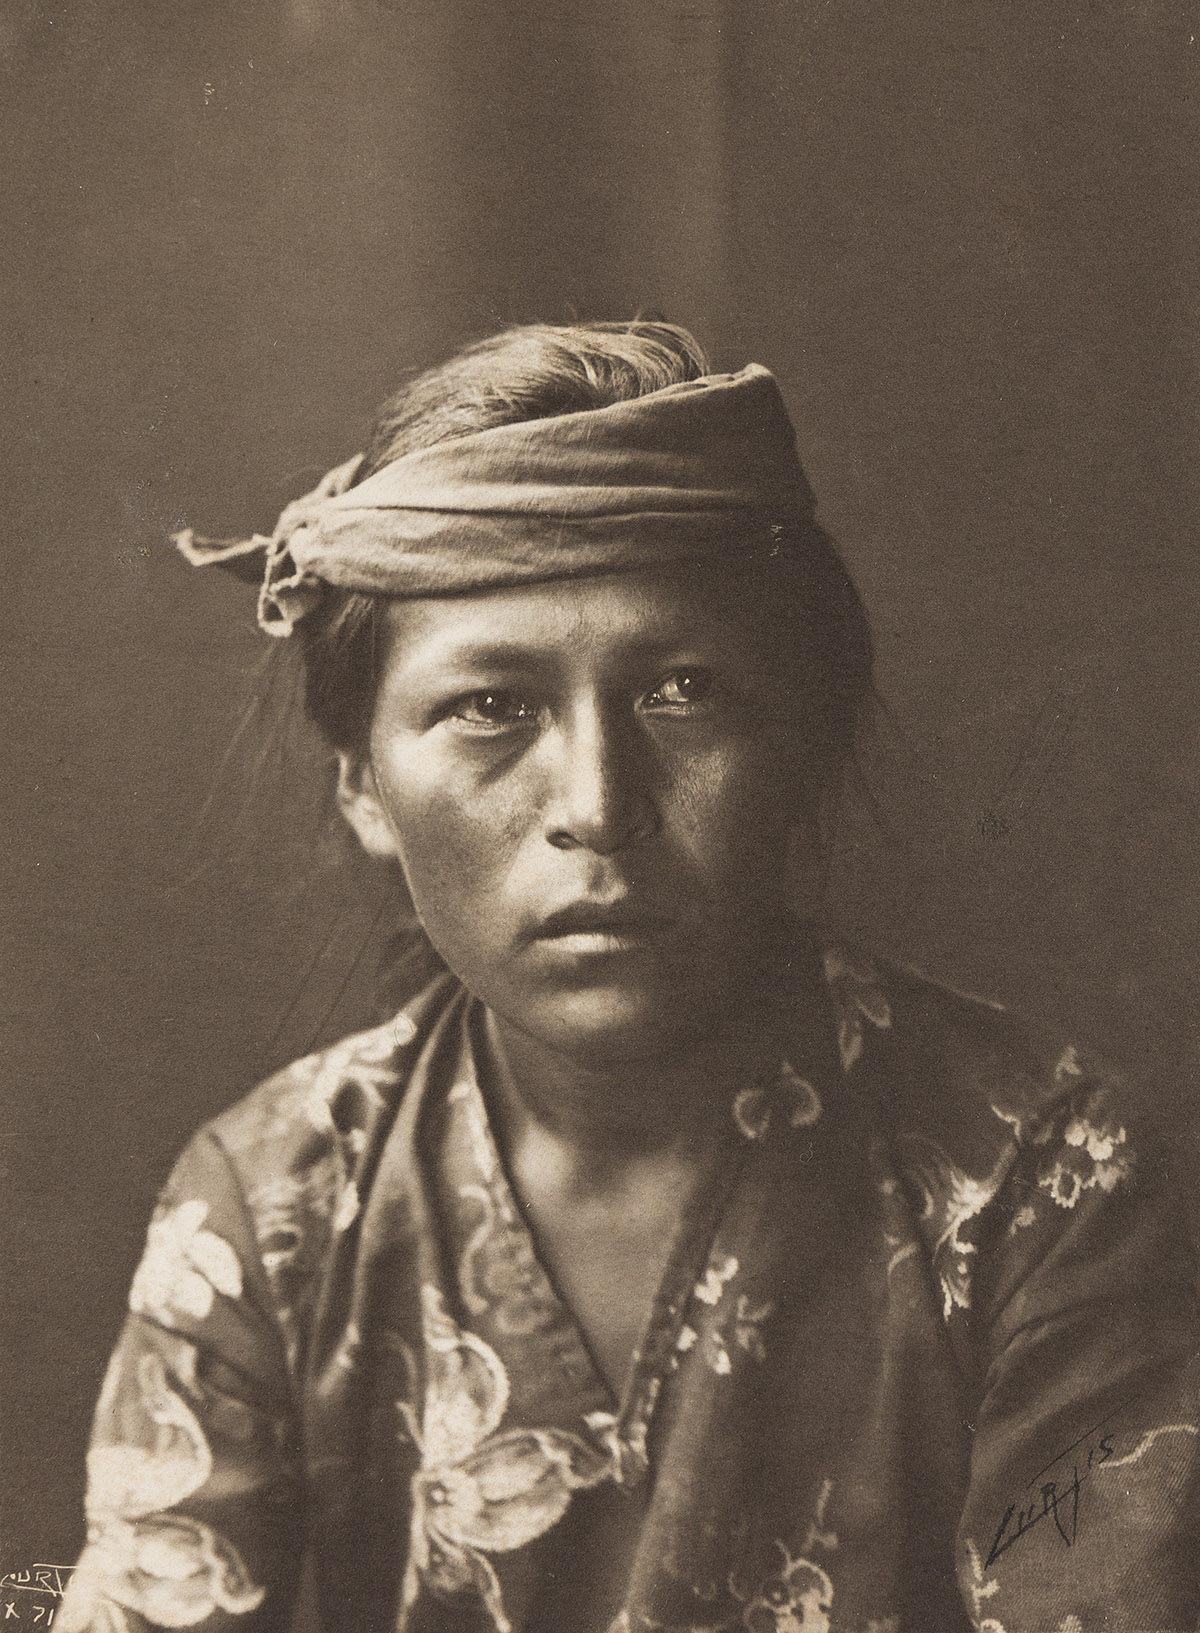 EDWARD S. CURTIS (1868-1952) Portrait of a young figure.